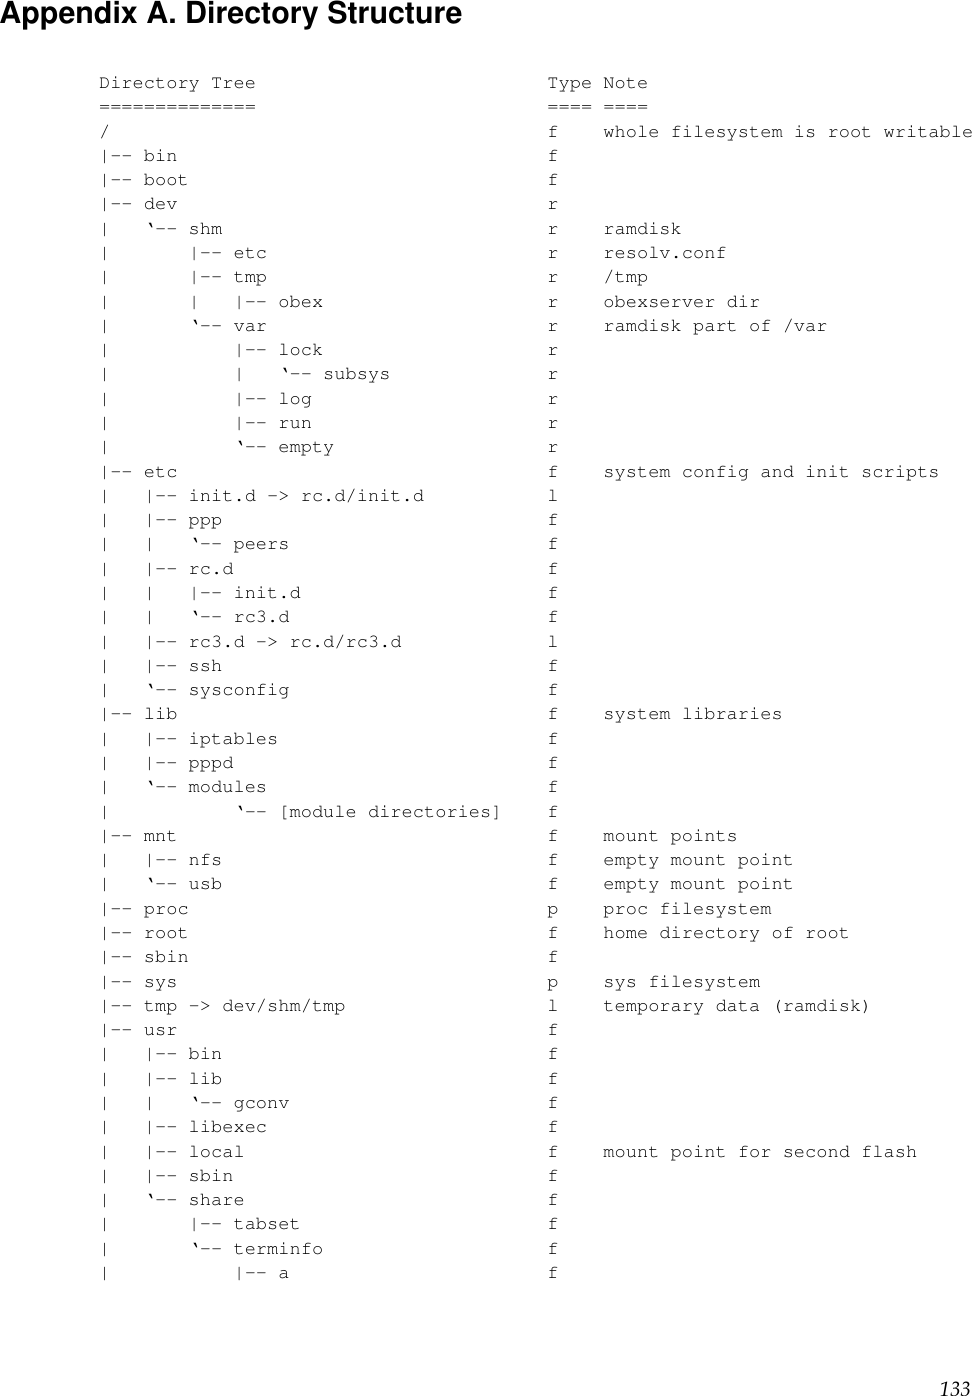 Appendix A. Directory StructureDirectory Tree Type Note============== ==== ====/ f whole filesystem is root writable|-- bin f|-- boot f|-- dev r| ‘-- shm r ramdisk| |-- etc r resolv.conf| |-- tmp r /tmp| | |-- obex r obexserver dir| ‘-- var r ramdisk part of /var| |-- lock r| | ‘-- subsys r| |-- log r| |-- run r| ‘-- empty r|-- etc f system config and init scripts| |-- init.d -&gt; rc.d/init.d l| |-- ppp f| | ‘-- peers f| |-- rc.d f| | |-- init.d f| | ‘-- rc3.d f| |-- rc3.d -&gt; rc.d/rc3.d l| |-- ssh f| ‘-- sysconfig f|-- lib f system libraries| |-- iptables f| |-- pppd f| ‘-- modules f| ‘-- [module directories] f|-- mnt f mount points| |-- nfs f empty mount point| ‘-- usb f empty mount point|-- proc p proc filesystem|-- root f home directory of root|-- sbin f|-- sys p sys filesystem|-- tmp -&gt; dev/shm/tmp l temporary data (ramdisk)|-- usr f| |-- bin f| |-- lib f| | ‘-- gconv f| |-- libexec f| |-- local f mount point for second flash| |-- sbin f| ‘-- share f| |-- tabset f| ‘-- terminfo f| |-- a f133